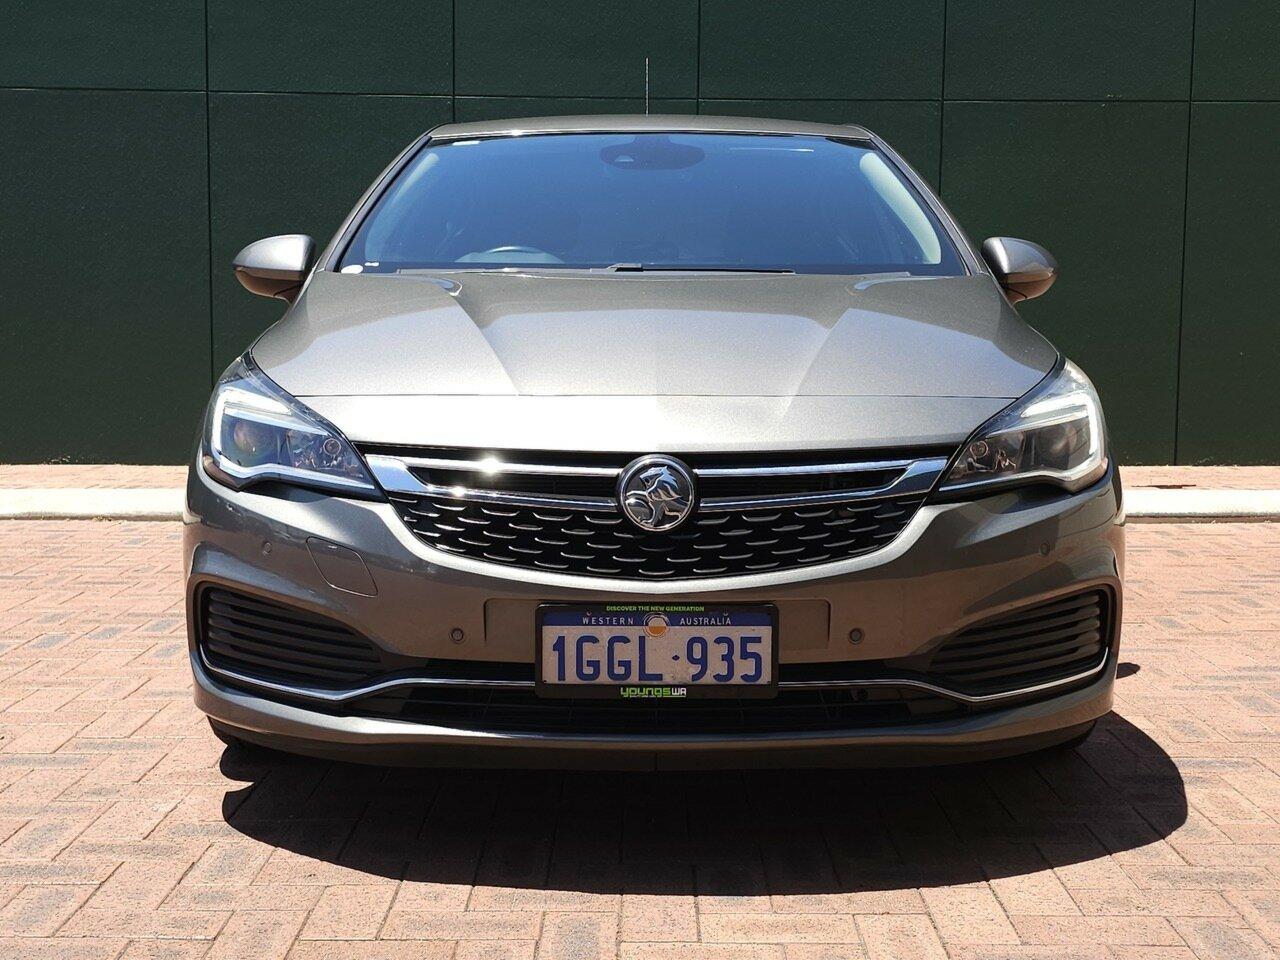 Holden Astra image 2